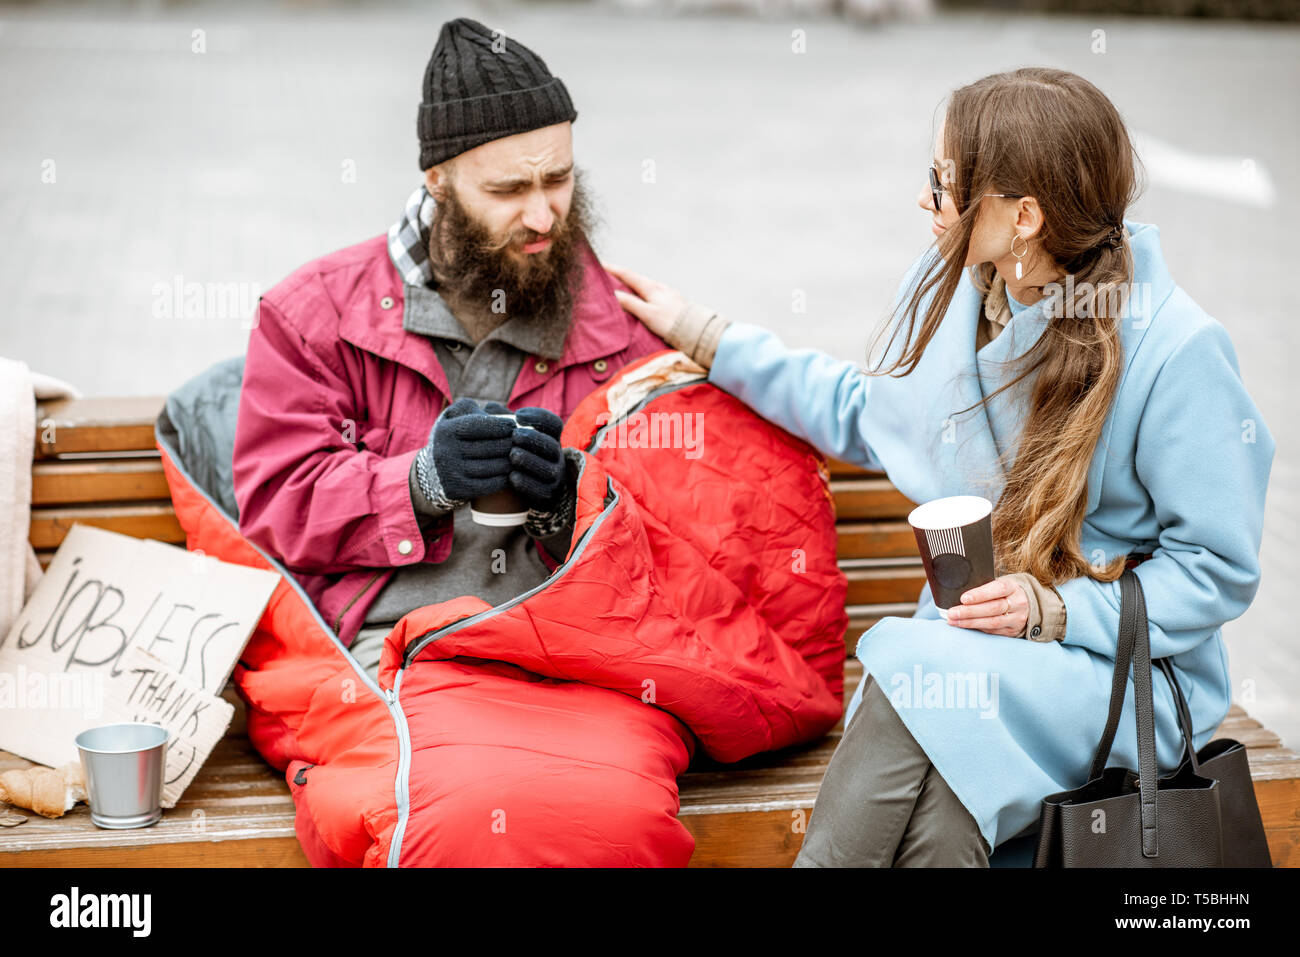 Homeless beggar with young woman listening to his sad story while sitting together on the bench outdoors. Concept of human understanding Stock Photo